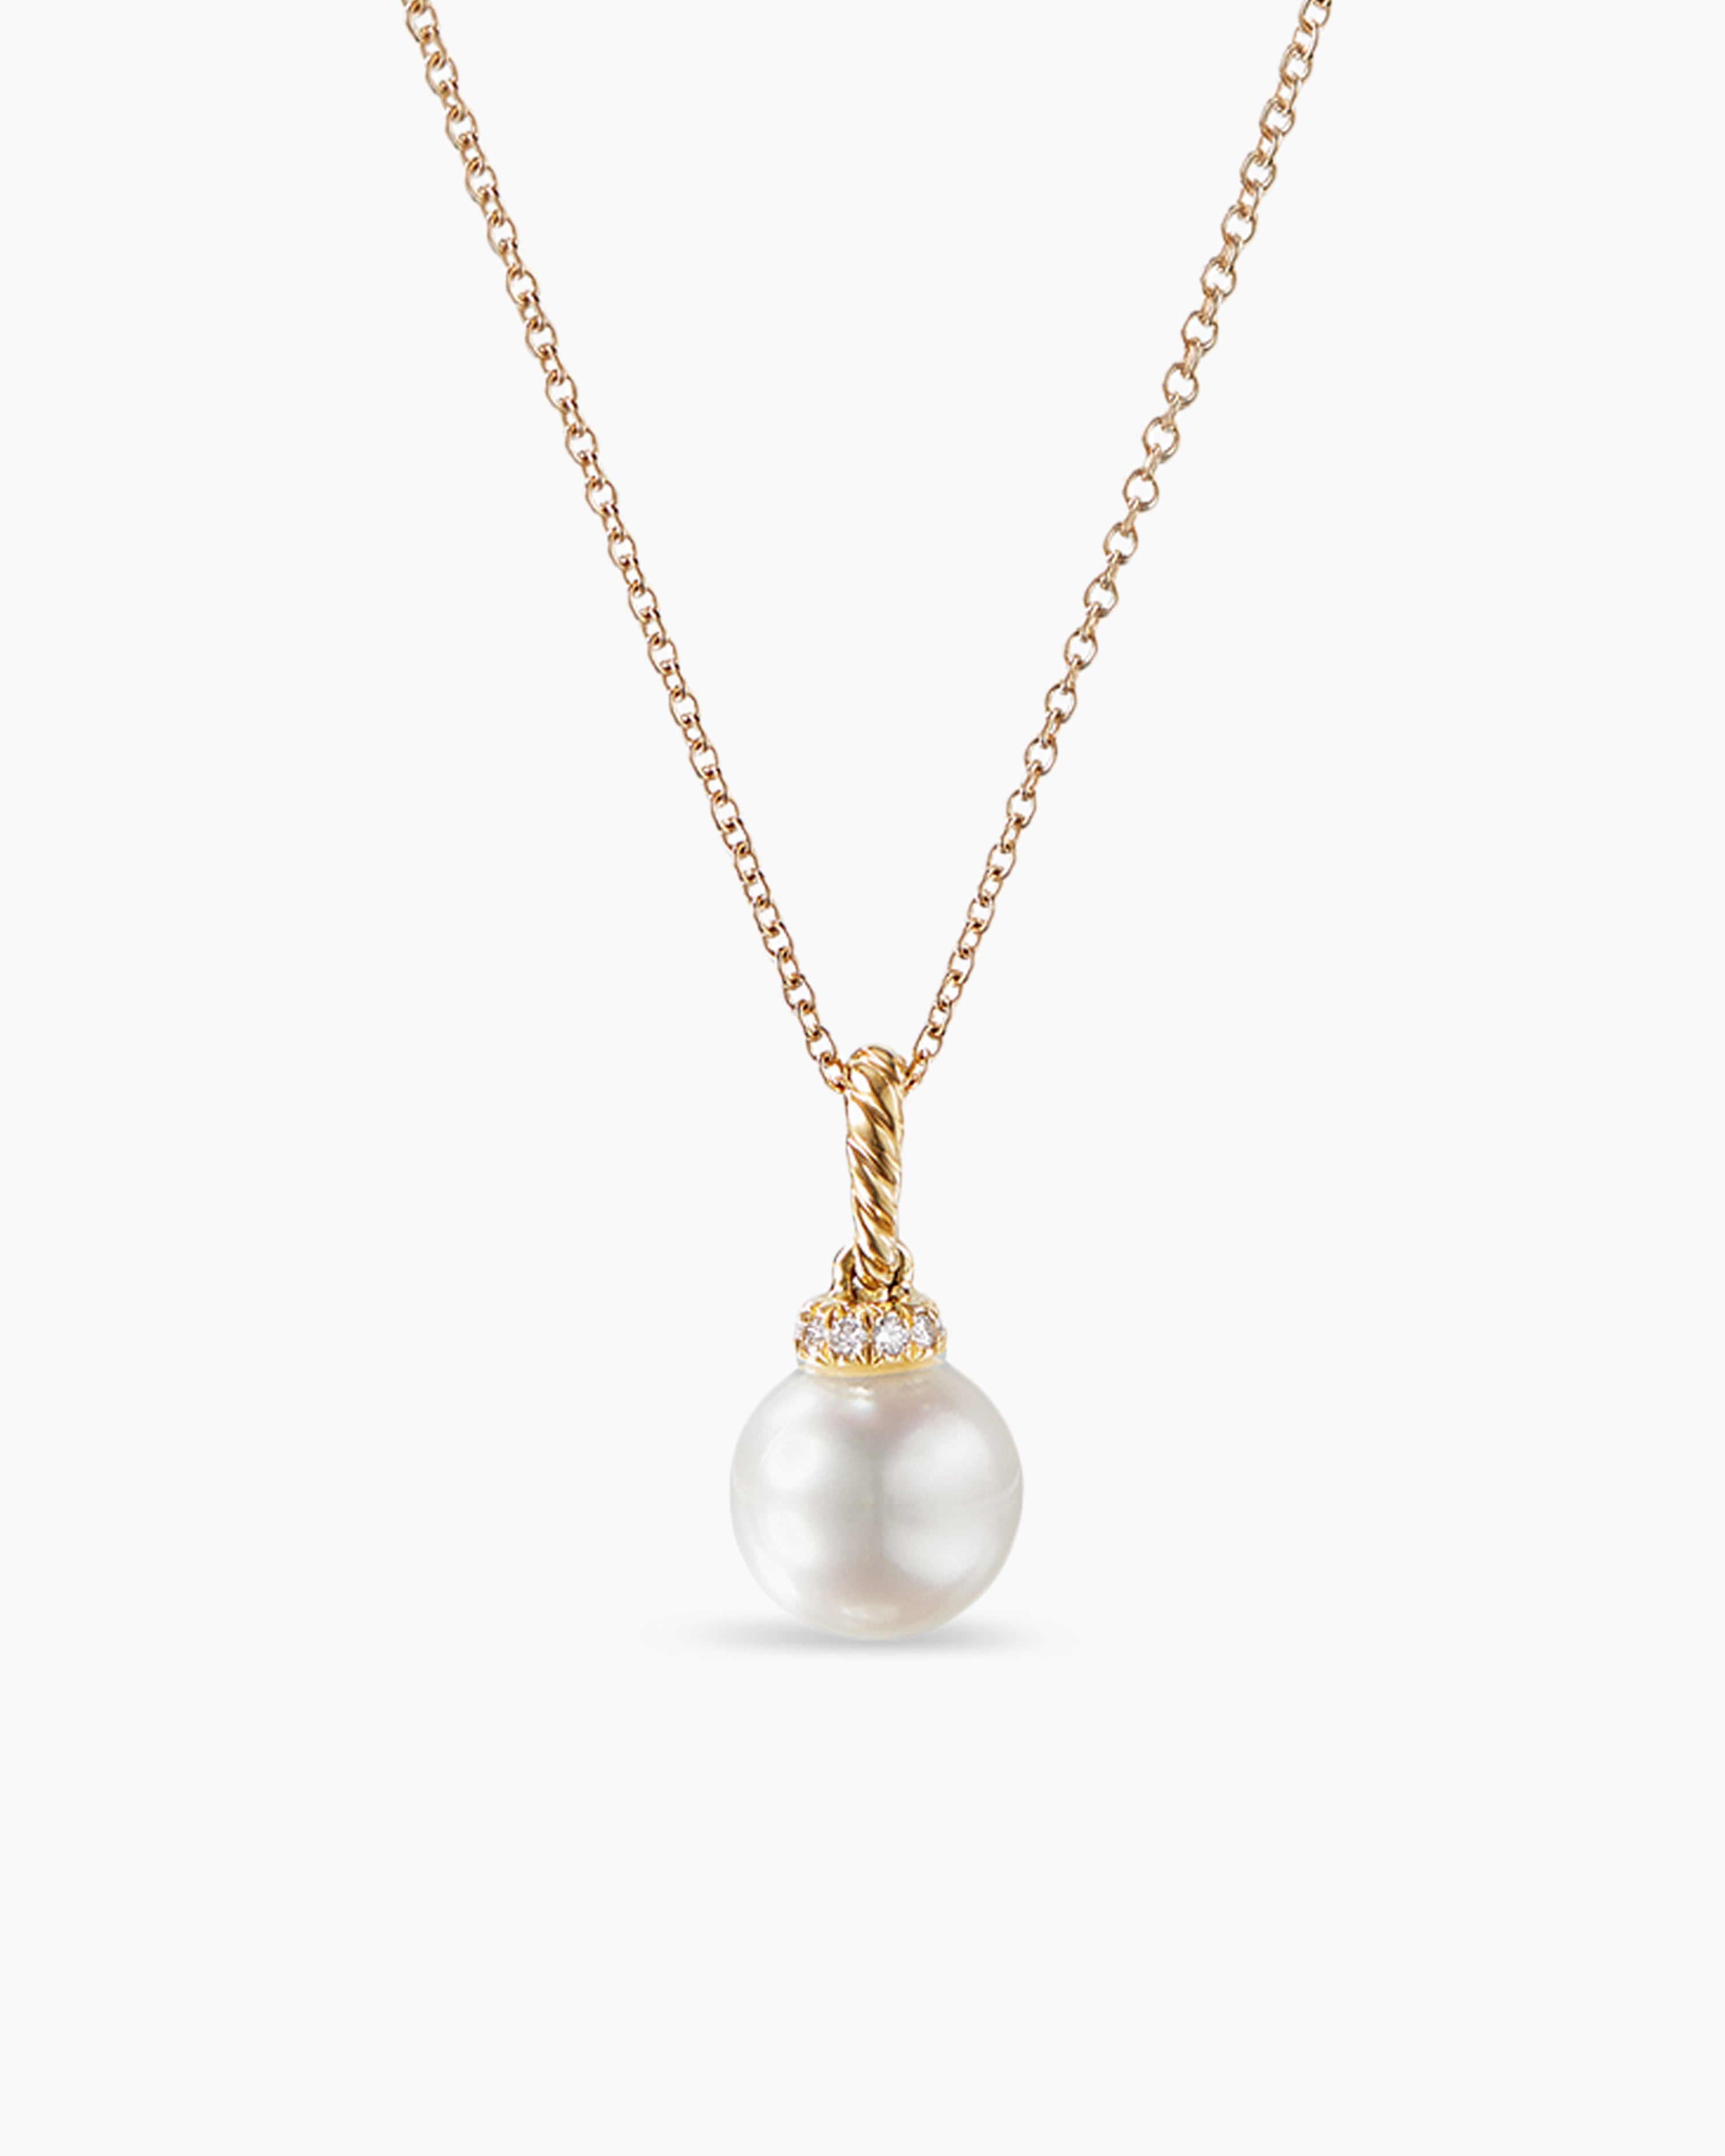 Solari Pendant Necklace in 18K Yellow Gold with Pearl and Diamonds, 8mm ...